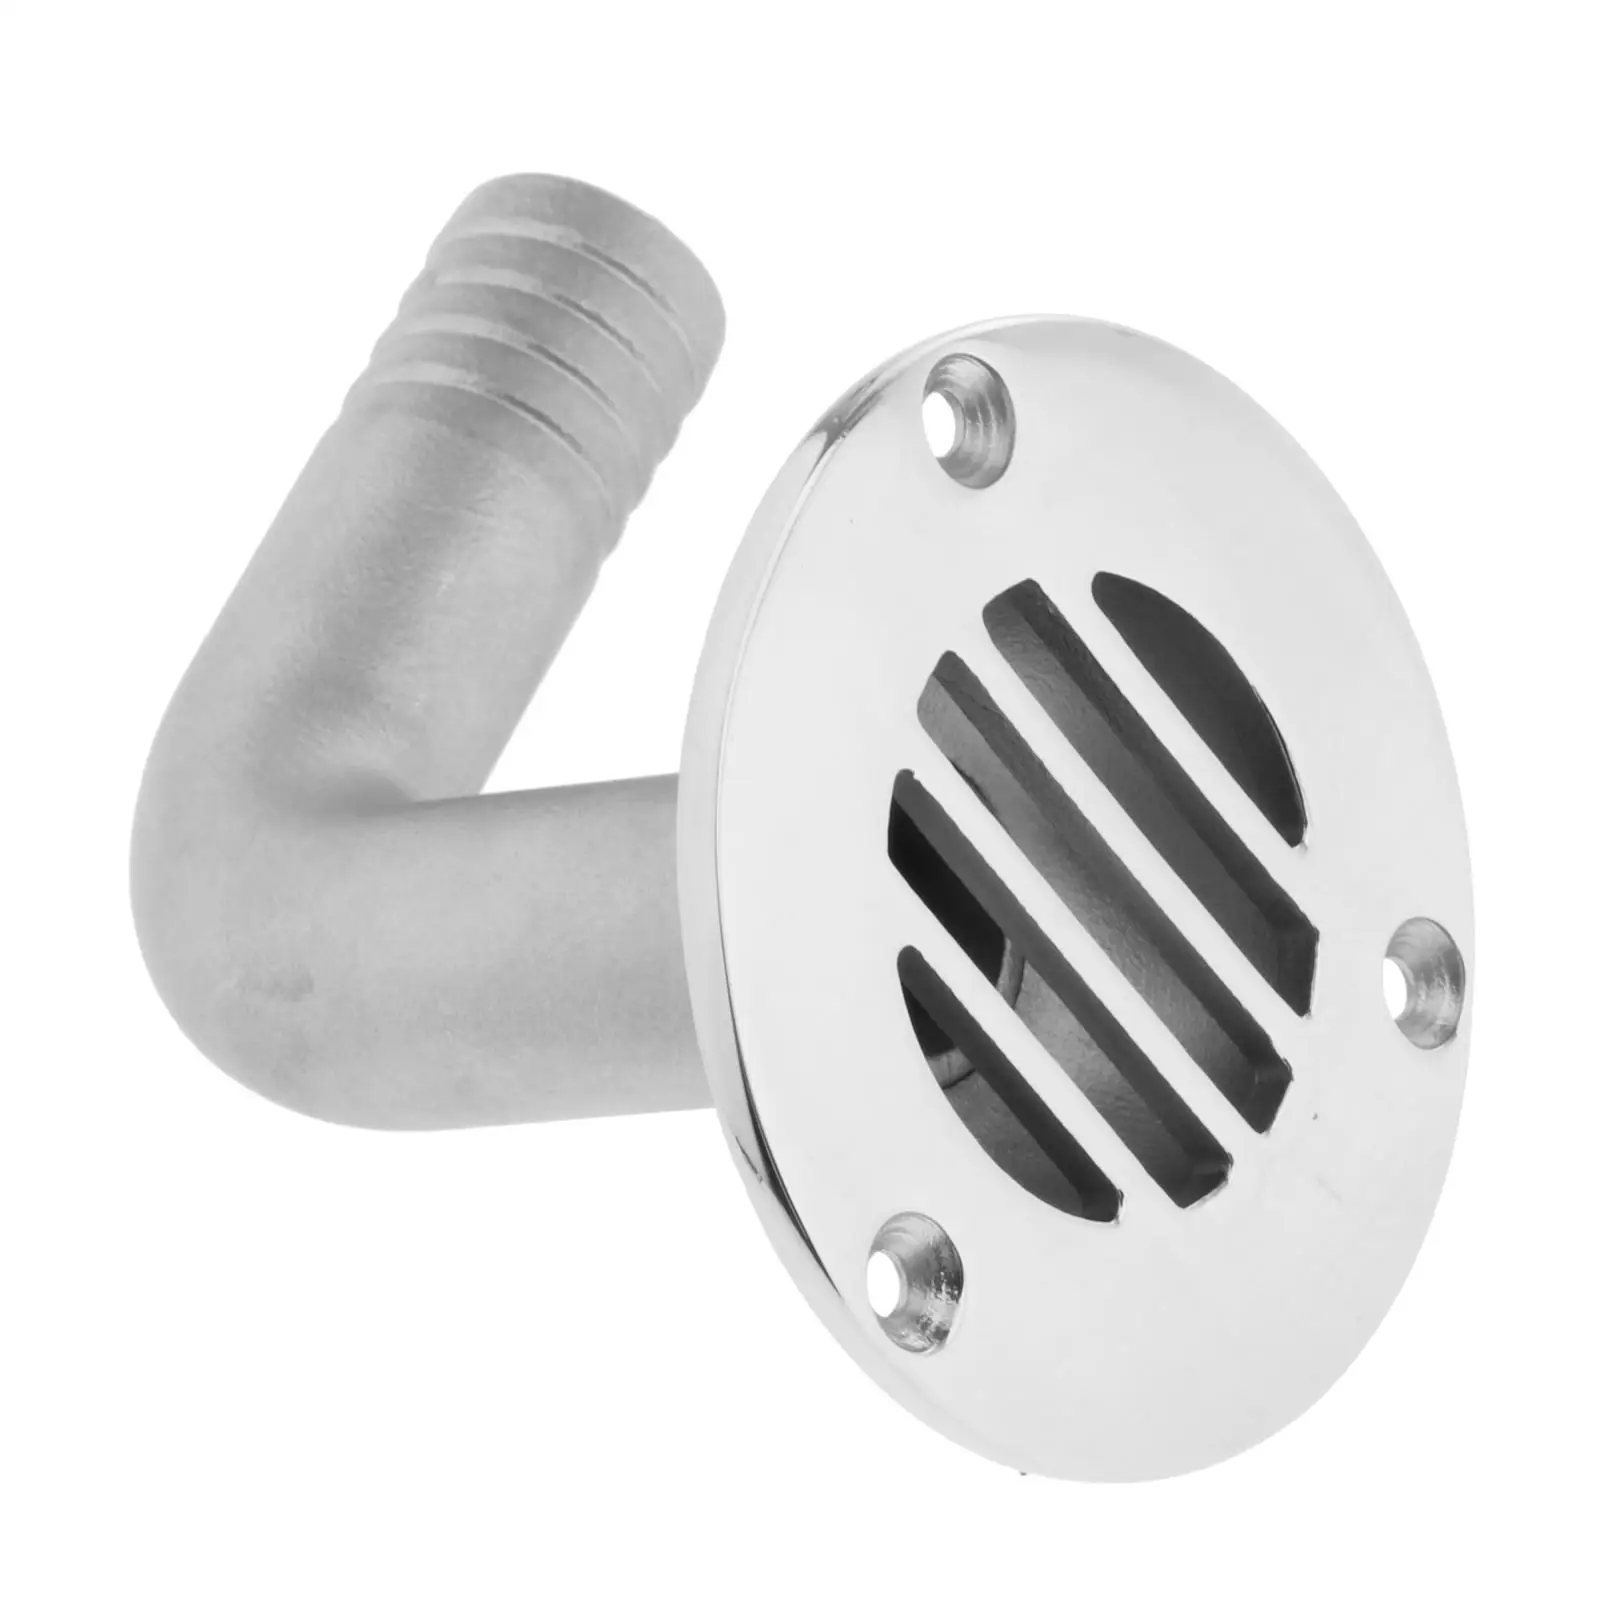 Deck Floor Drain Scupper - Marine Grade Stainless Steel - for Boat & Fishing Ship - 3/4 inch, Easy to Install